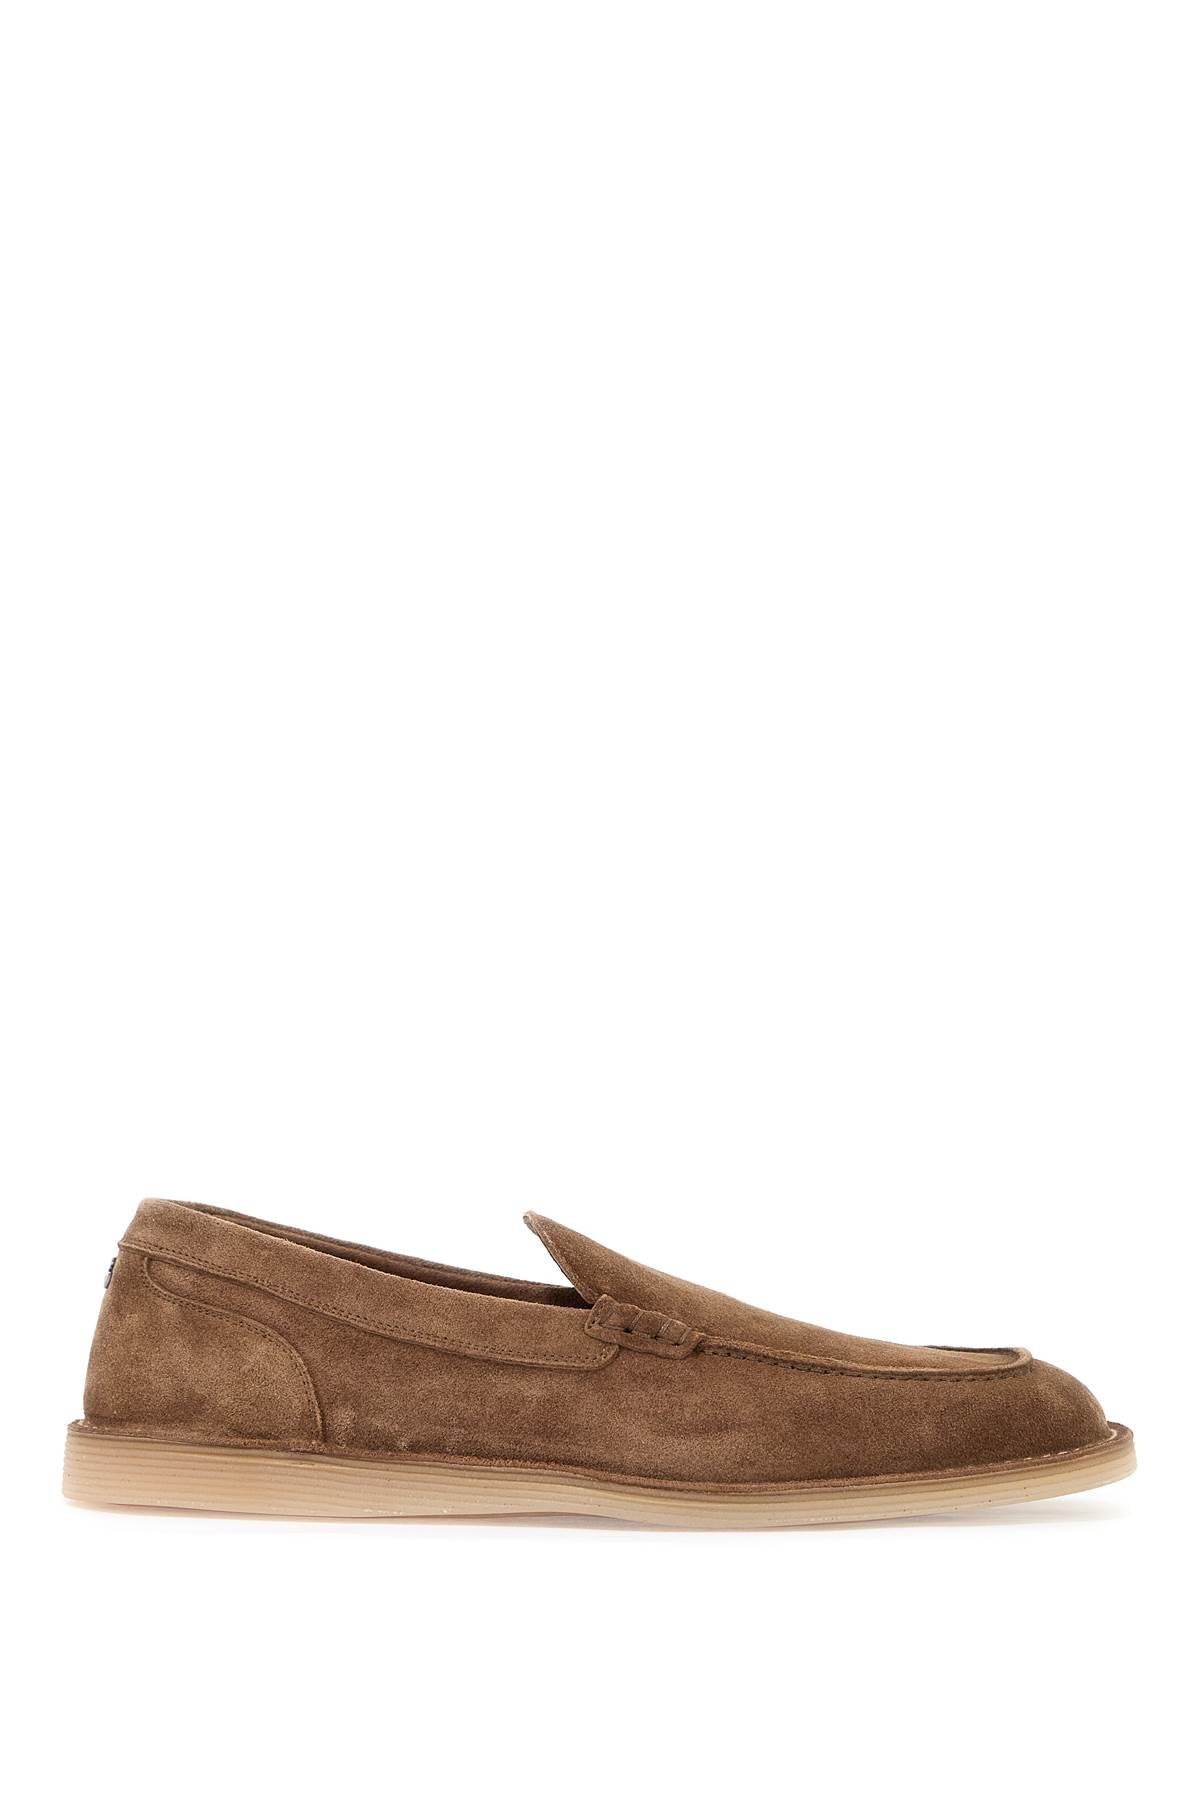 Dolce & Gabbana Suede Leather Moccas Men - 1